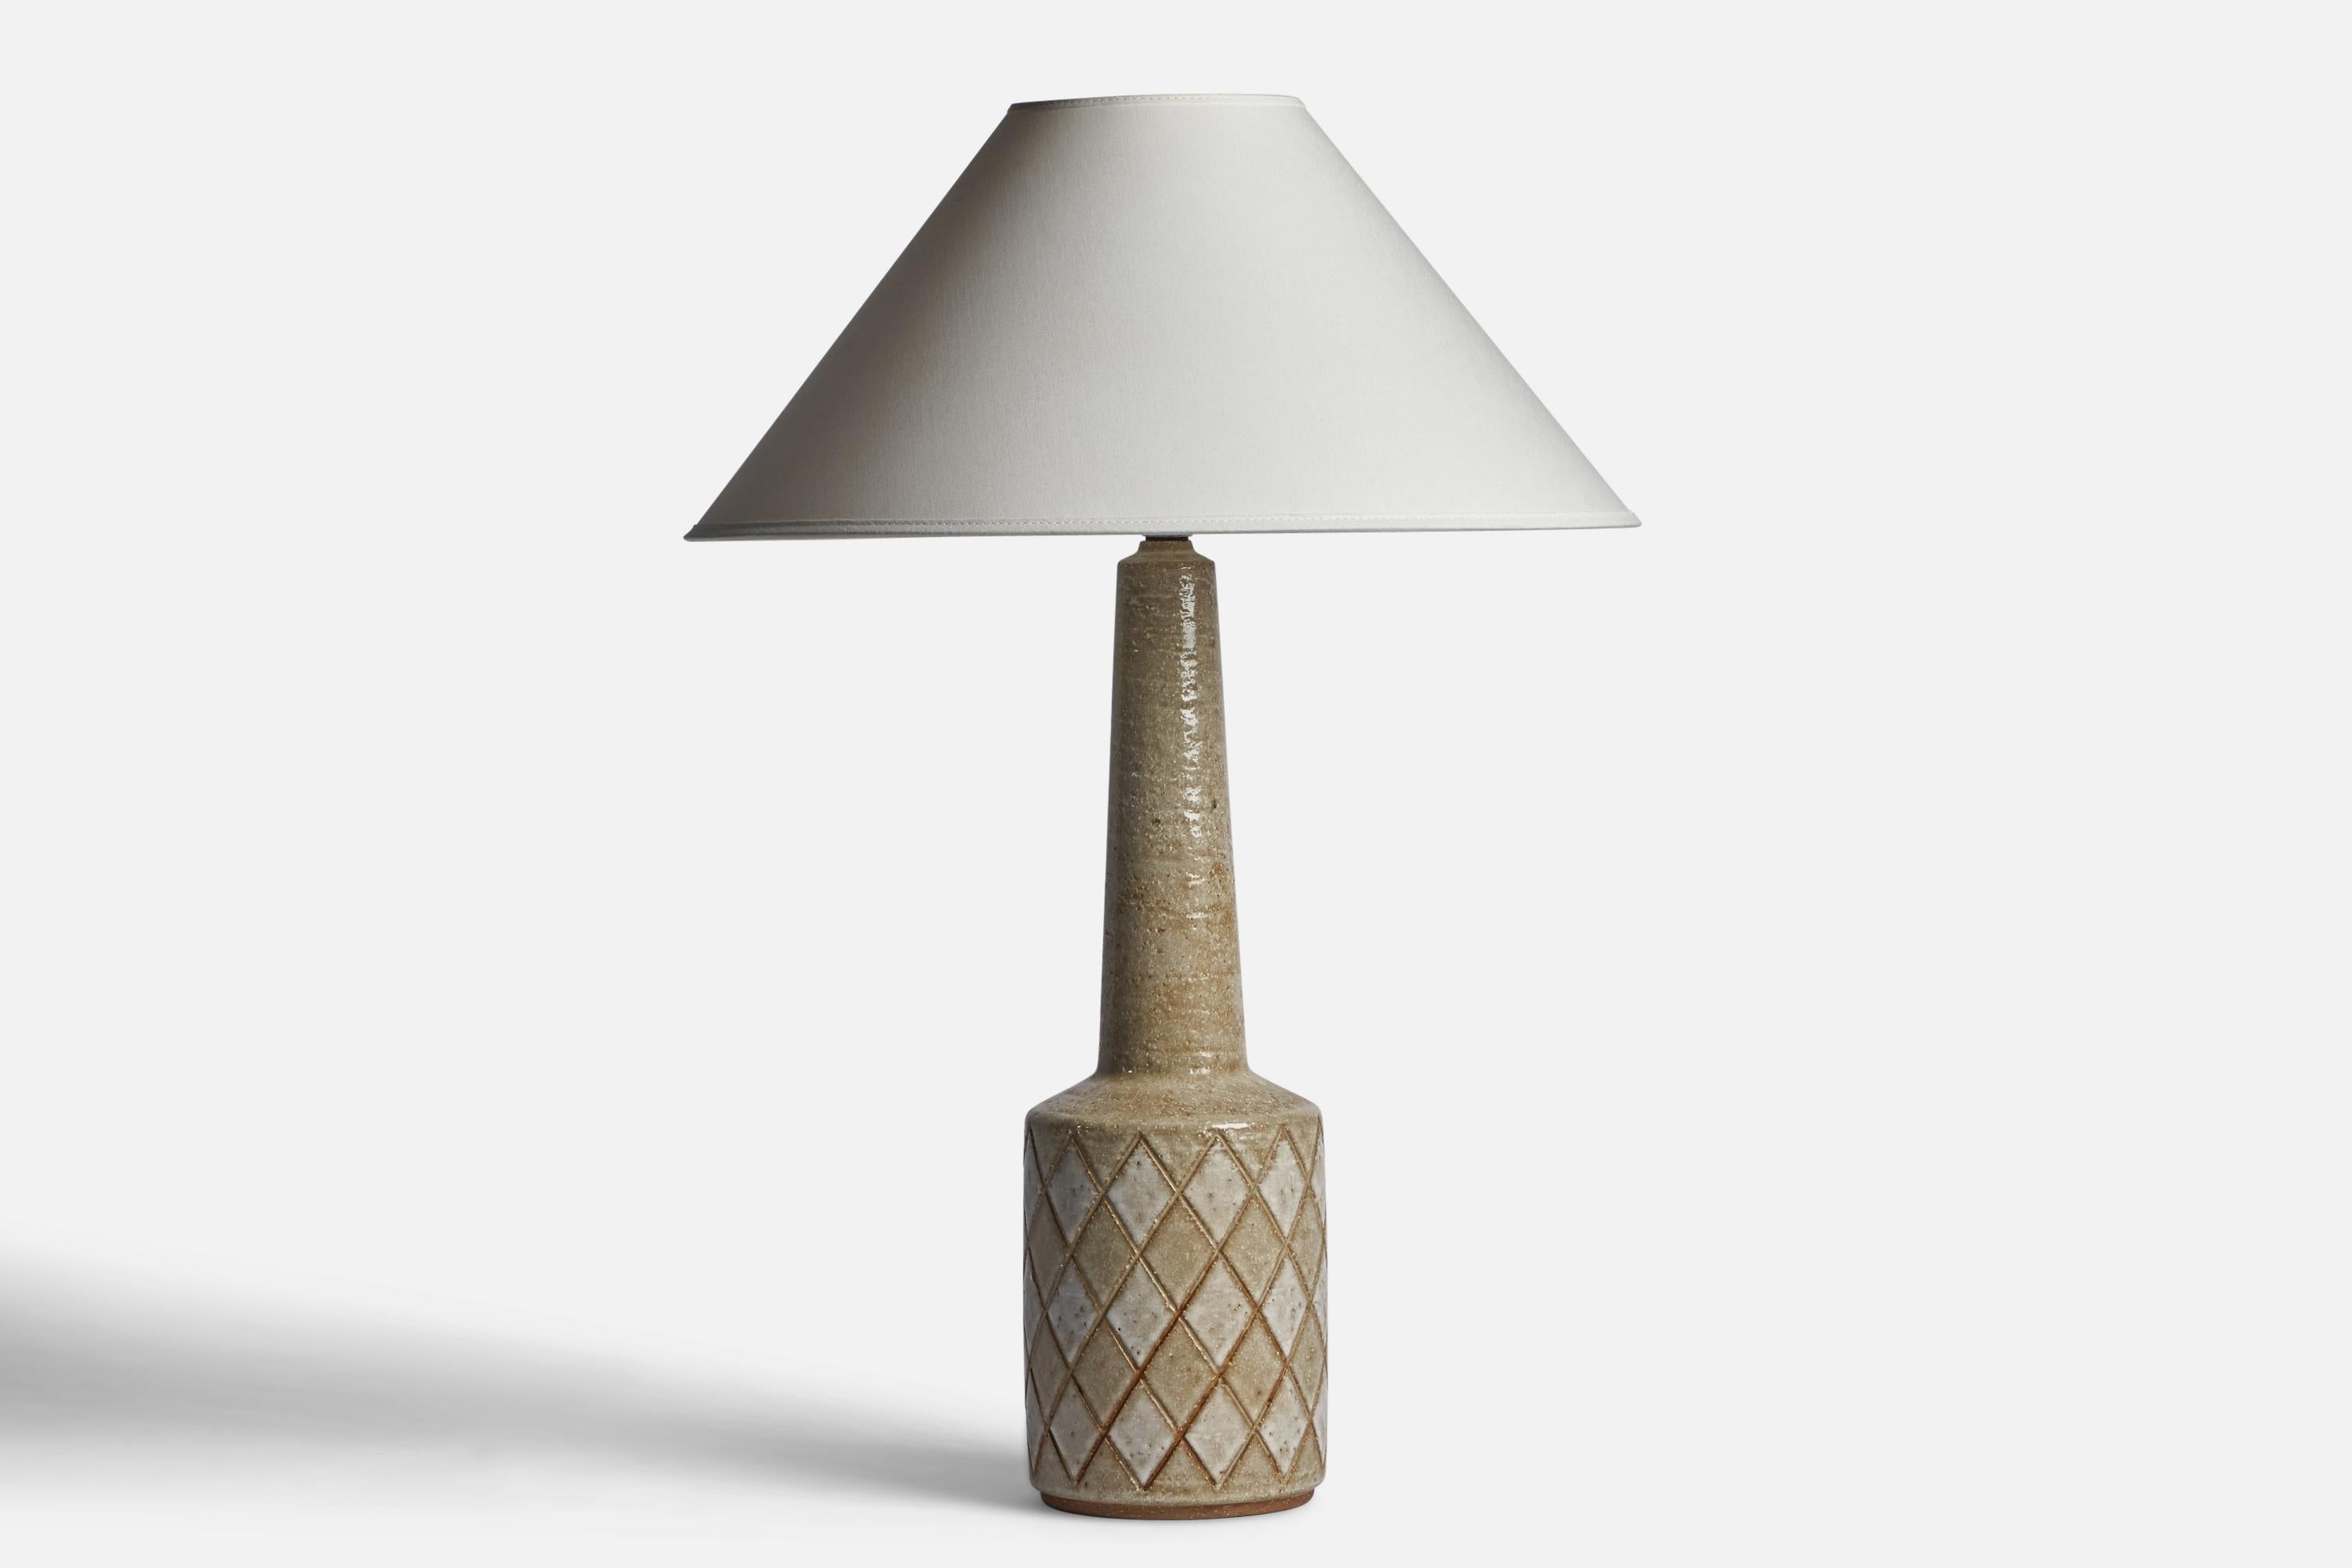 A light grey-glazed stoneware table lamp designed by Per & Annelise Linneman-Schmidt and produced by Palshus, Denmark, 1960s.

Dimensions of Lamp (inches): 19.2” H x 5.1” Diameter
Dimensions of Shade (inches): 4.5” Top Diameter x 16” Bottom Diameter